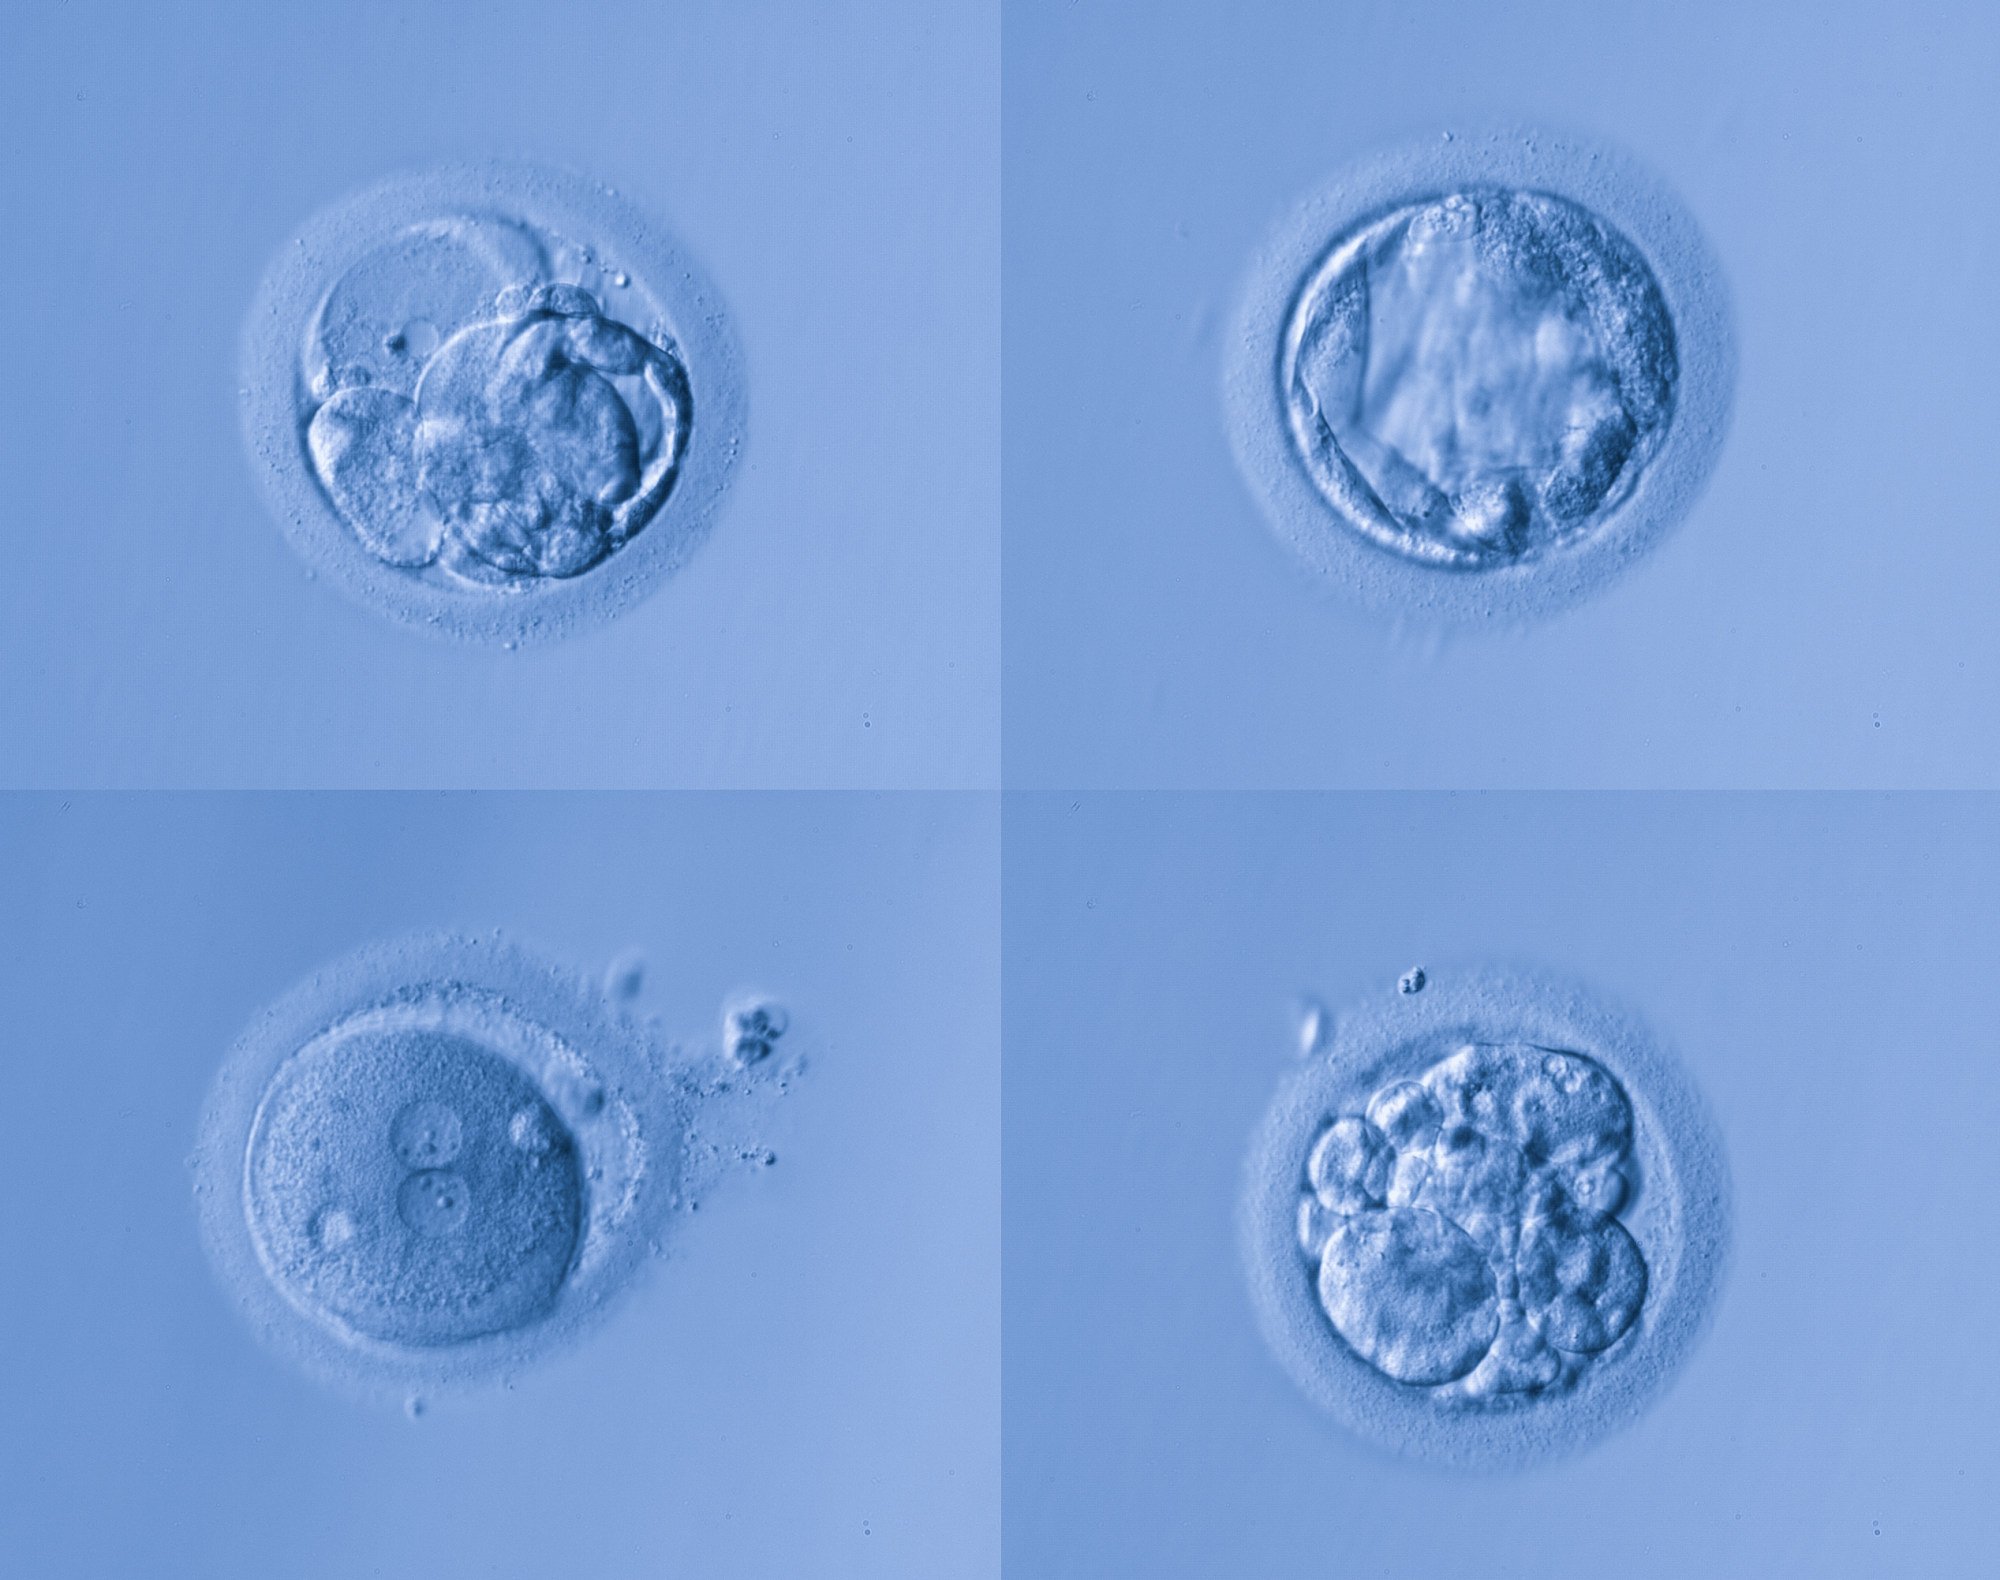 Human egg cells. Scientists are debating when it is ethically acceptable to use an embryo in scientific research. Photo: Shutterstock